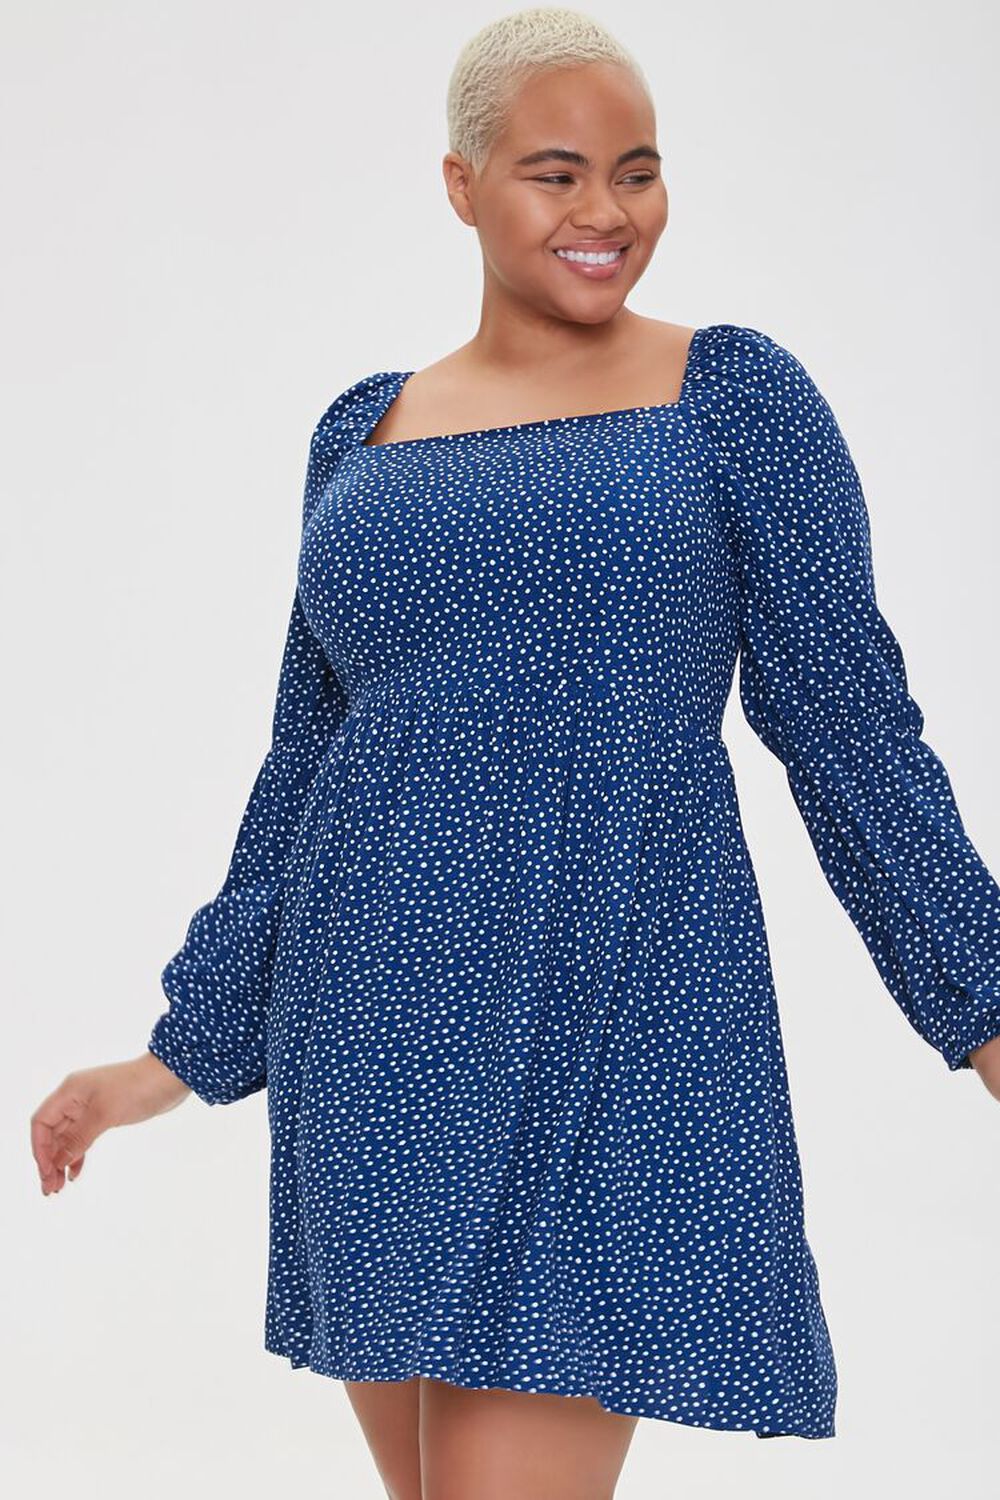 NAVY/CREAM Plus Size Pin Dot Fit & Flare Dress, image 1